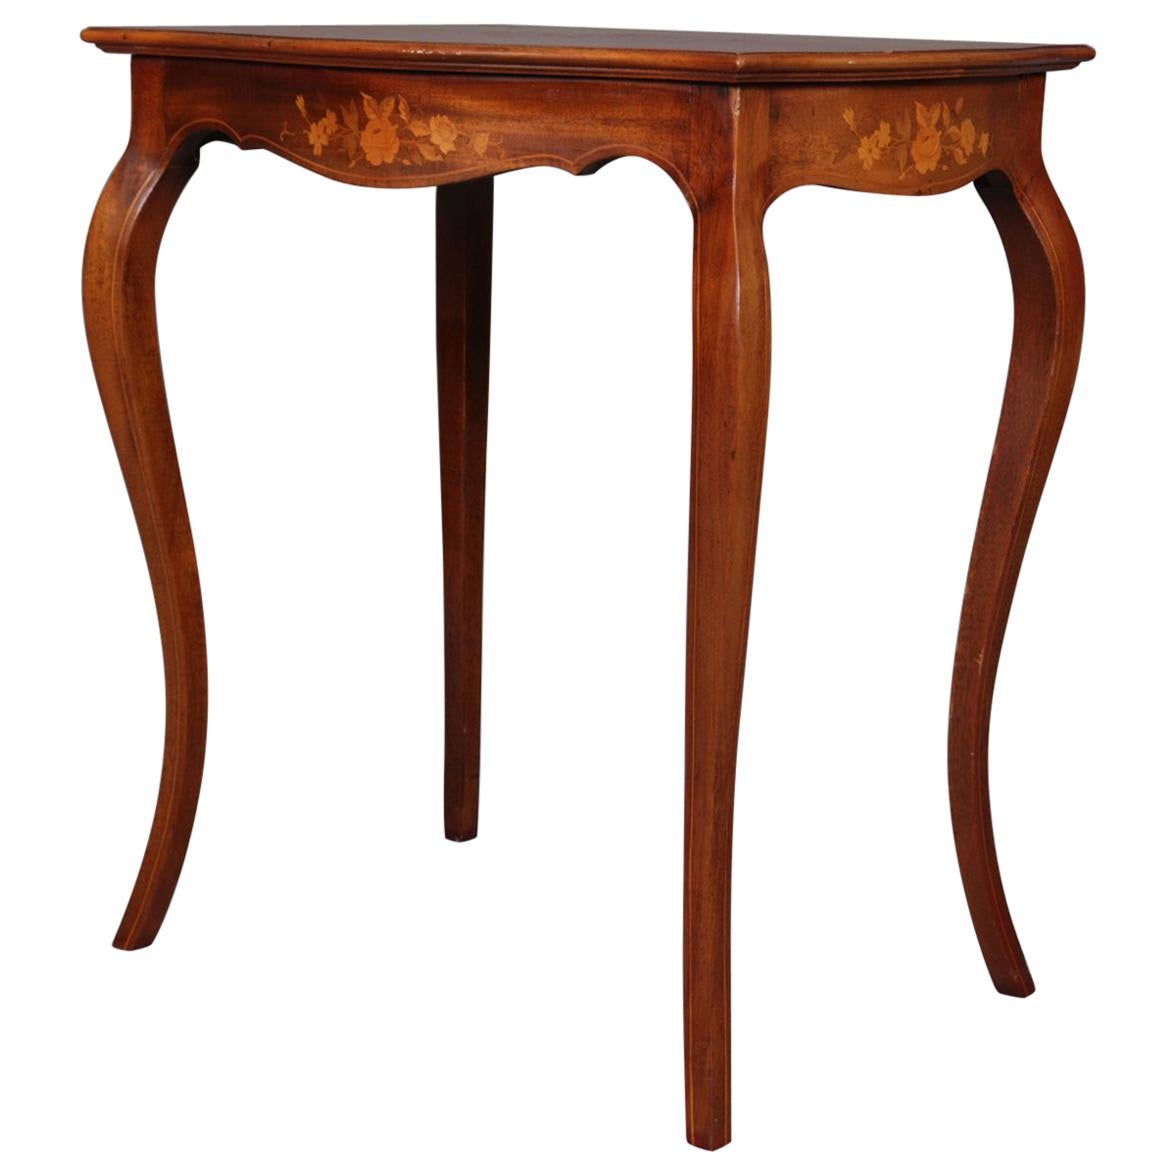 Antique French Marquetry, Mahogany with Satinwood  Inlay, Lamp Table, circa 1900